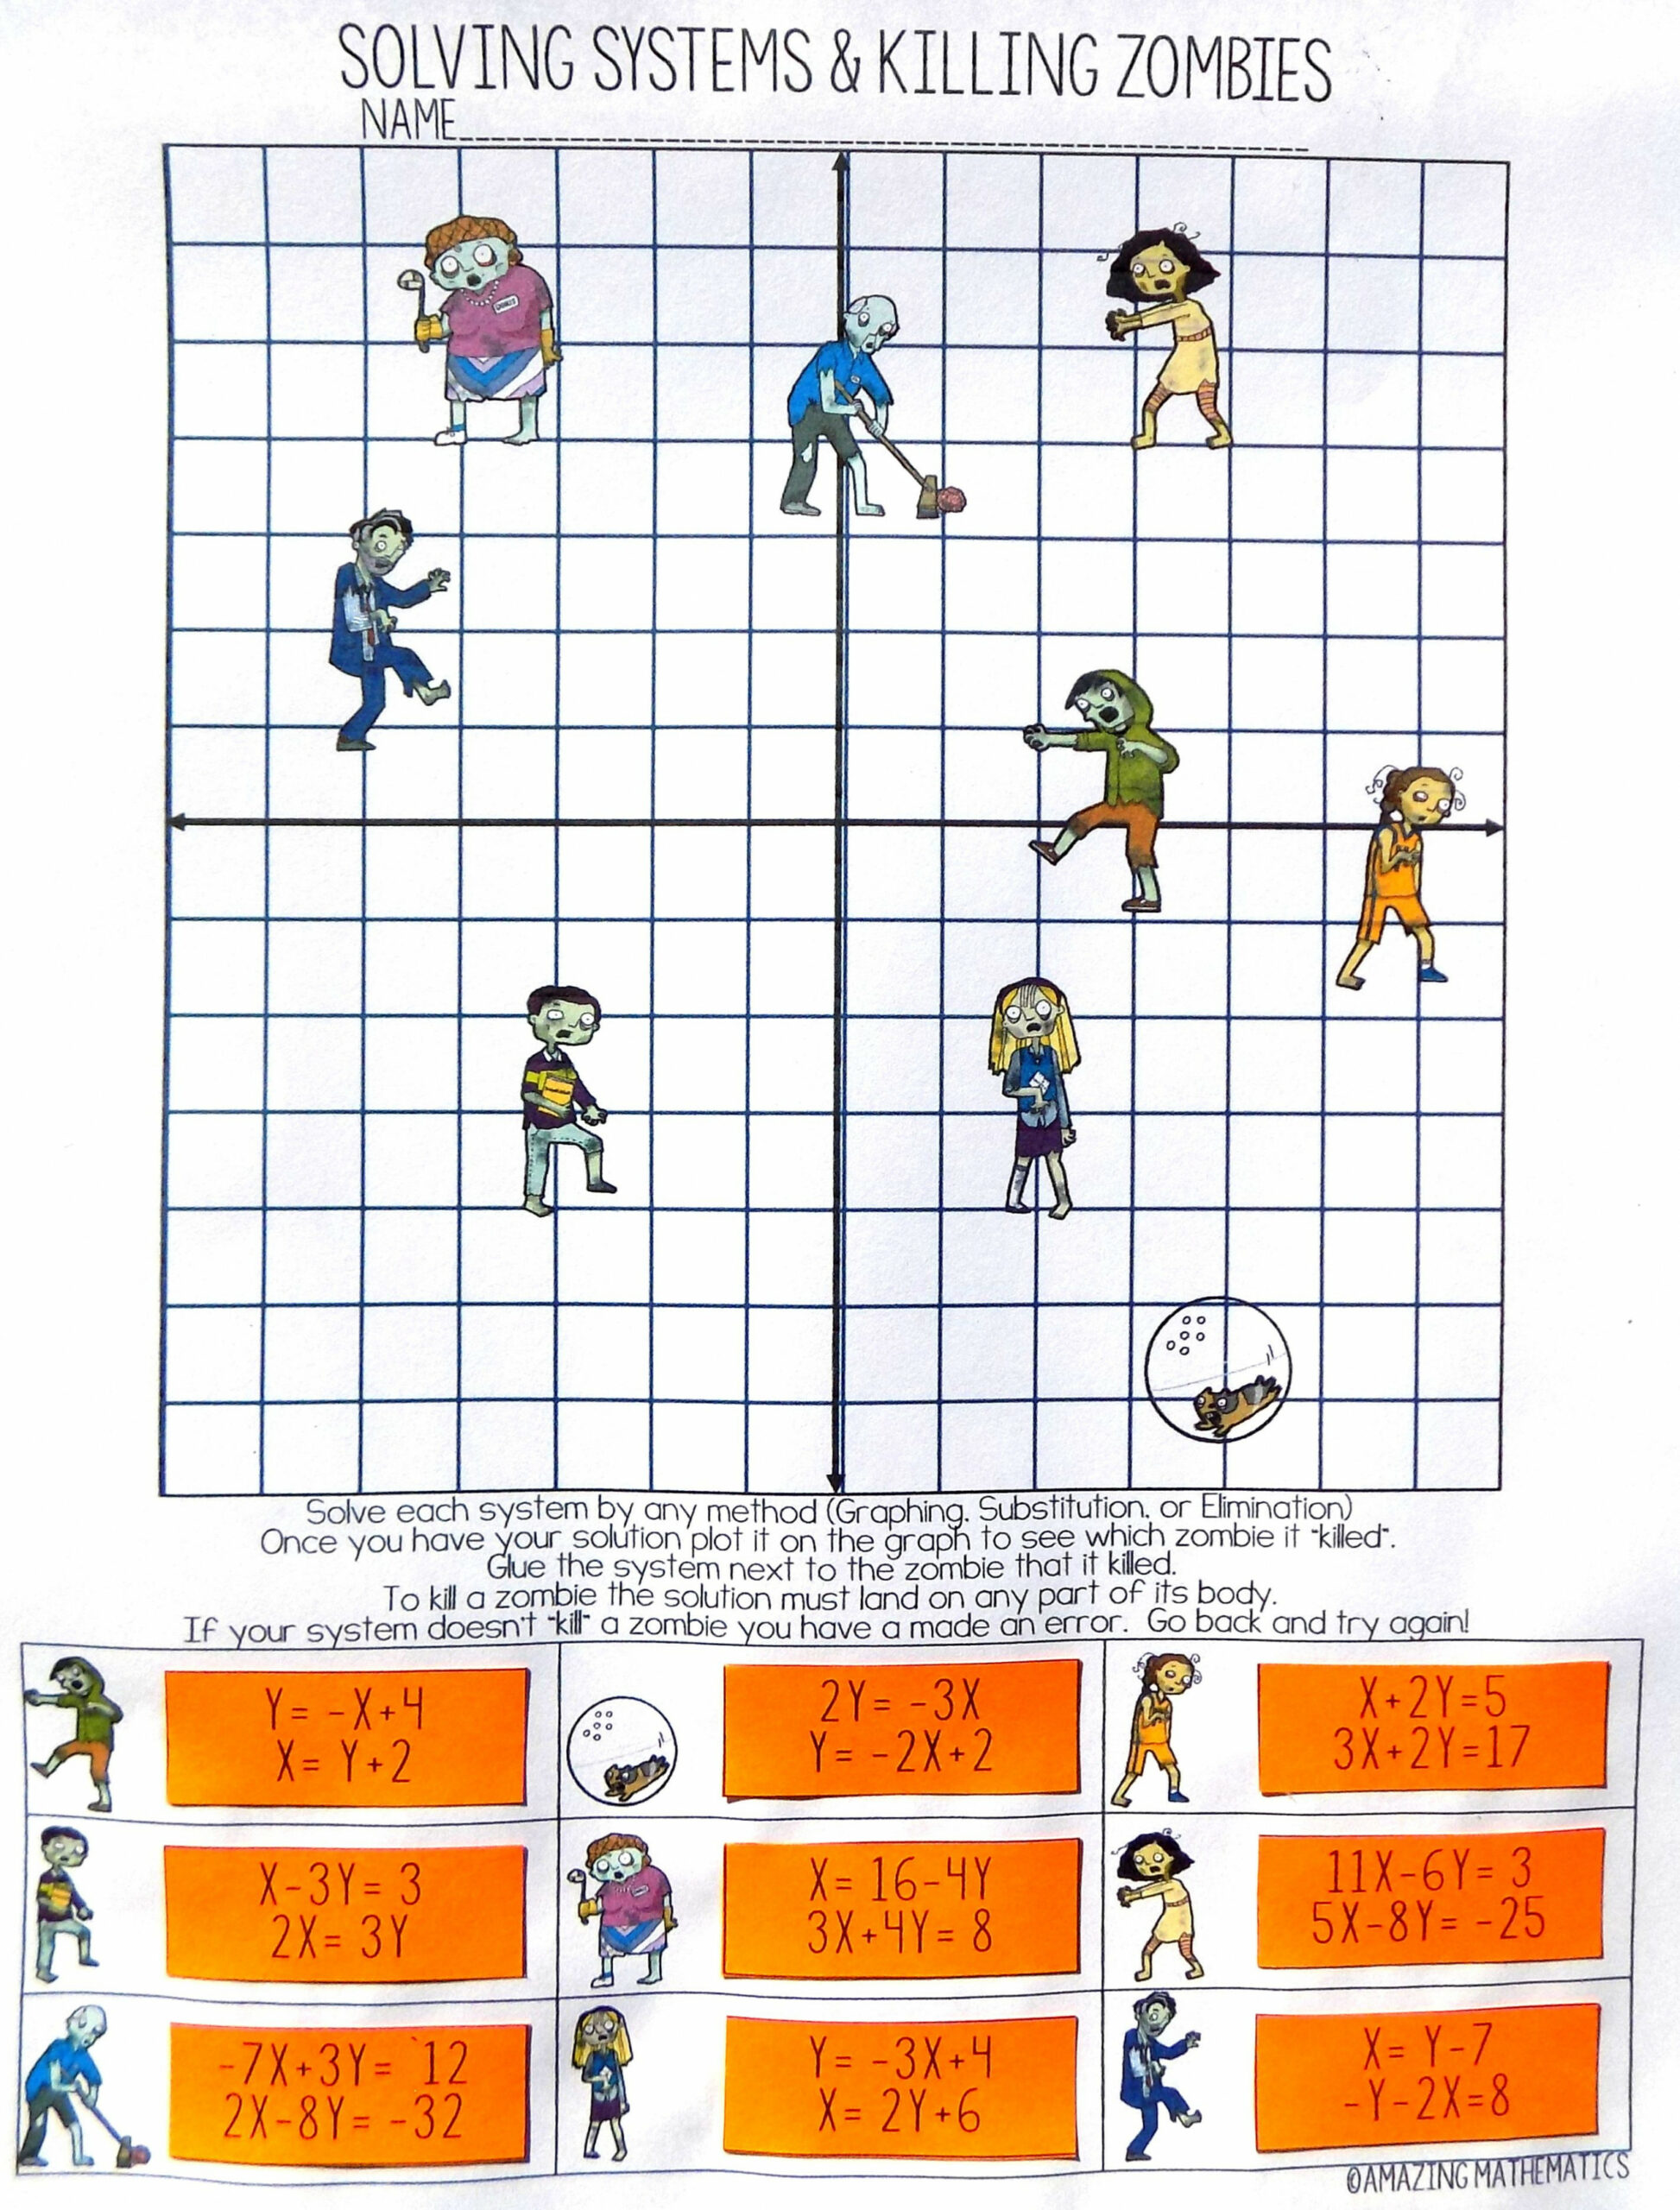 Solving Systems of Equations Activity & Zombies - by Elimination